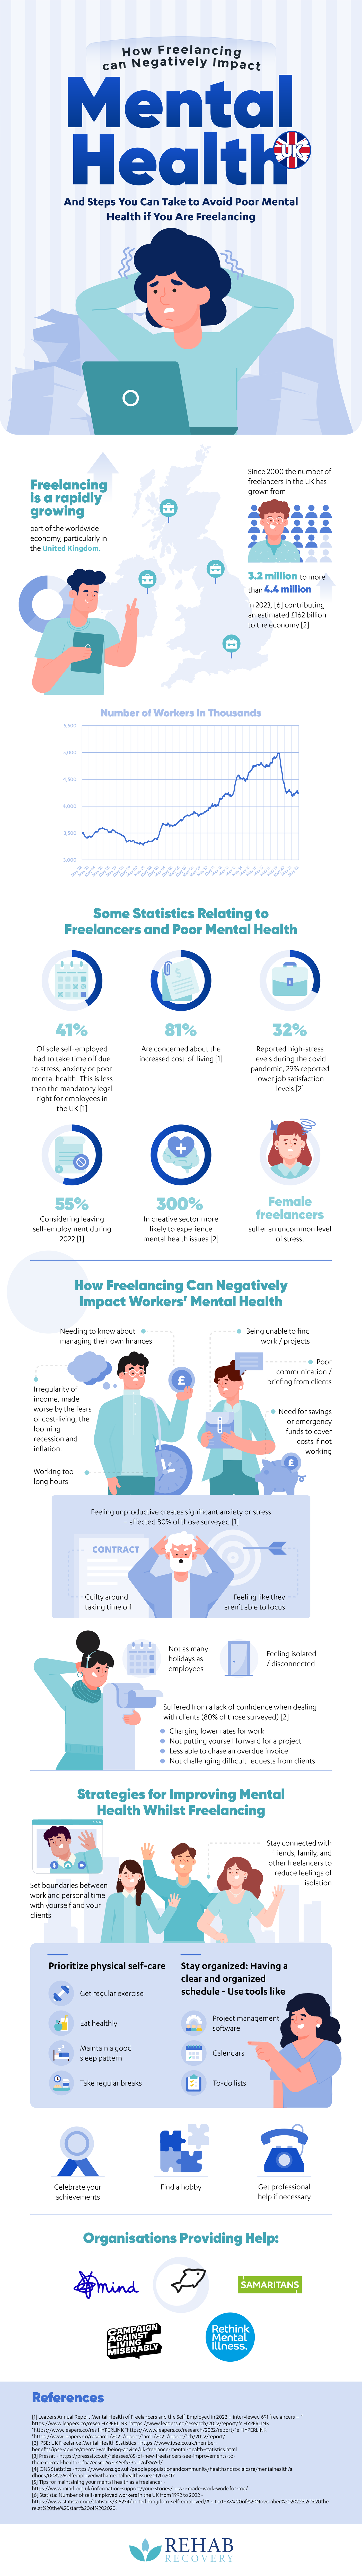 How freelancing can impact mental health